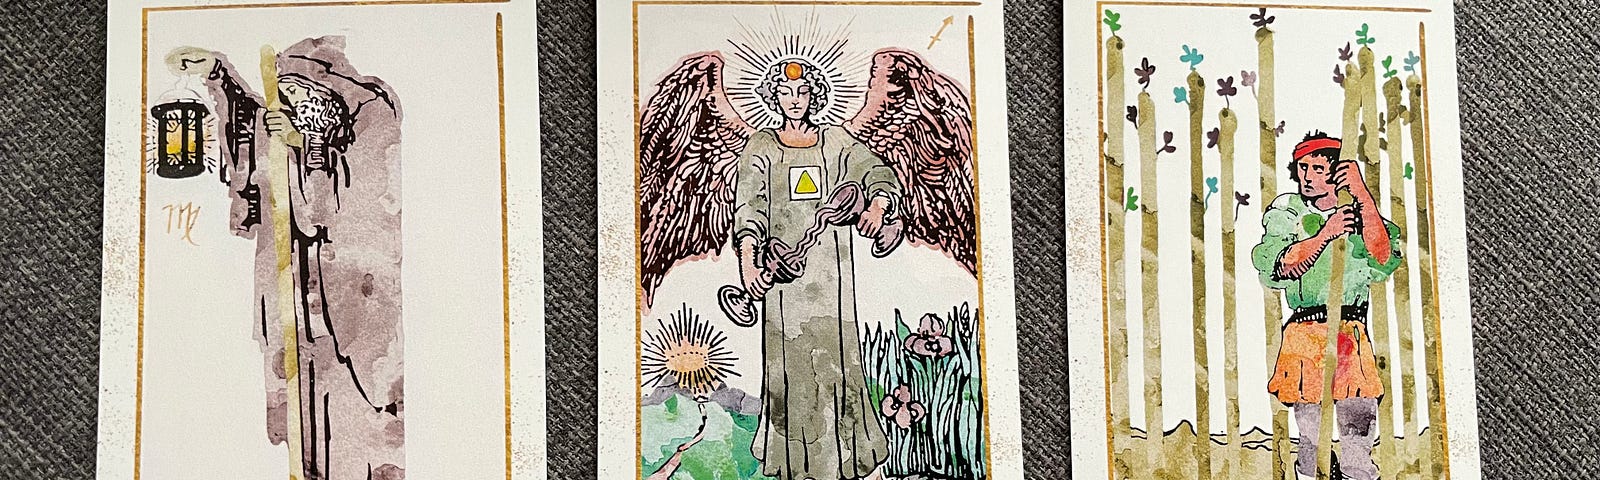 3 Tarot cards laid out from left to right: Hermit, Temperance, Nine of Wands. The illustrations are based on traditional Tarot card design, but recreated in watercolor.